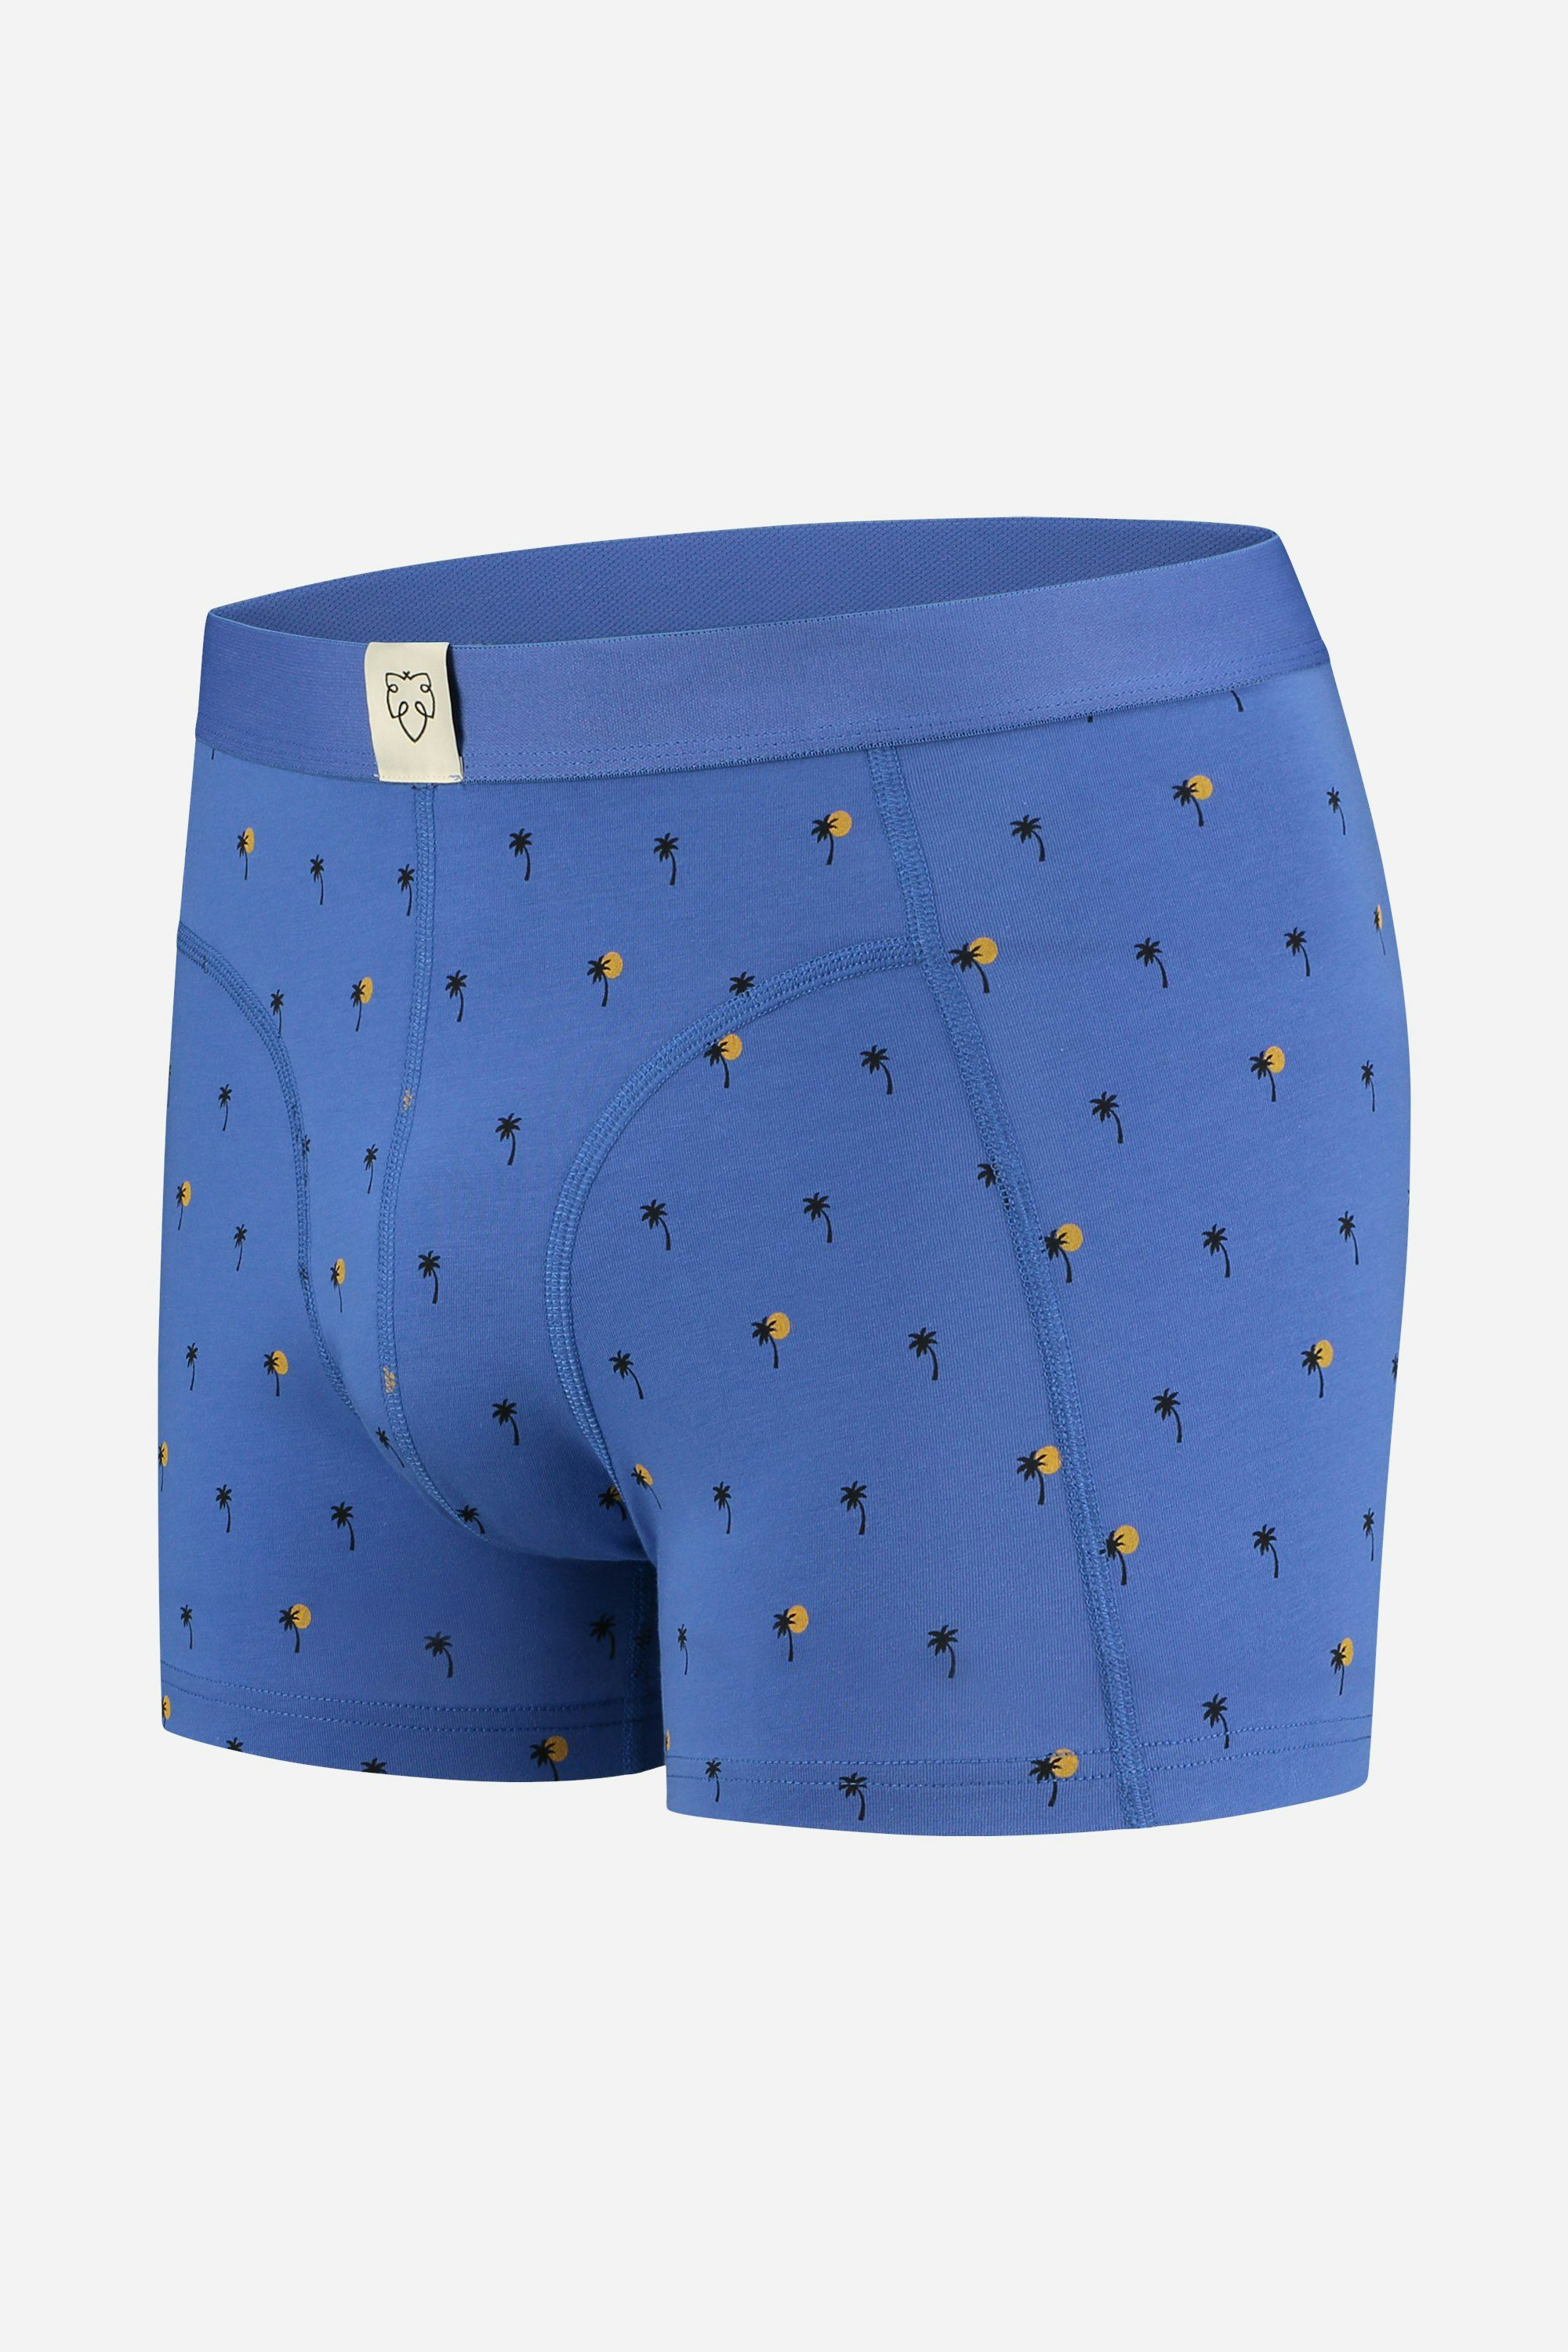 A-dam blue boxer brief with palm trees from GOTS pure organic cotton